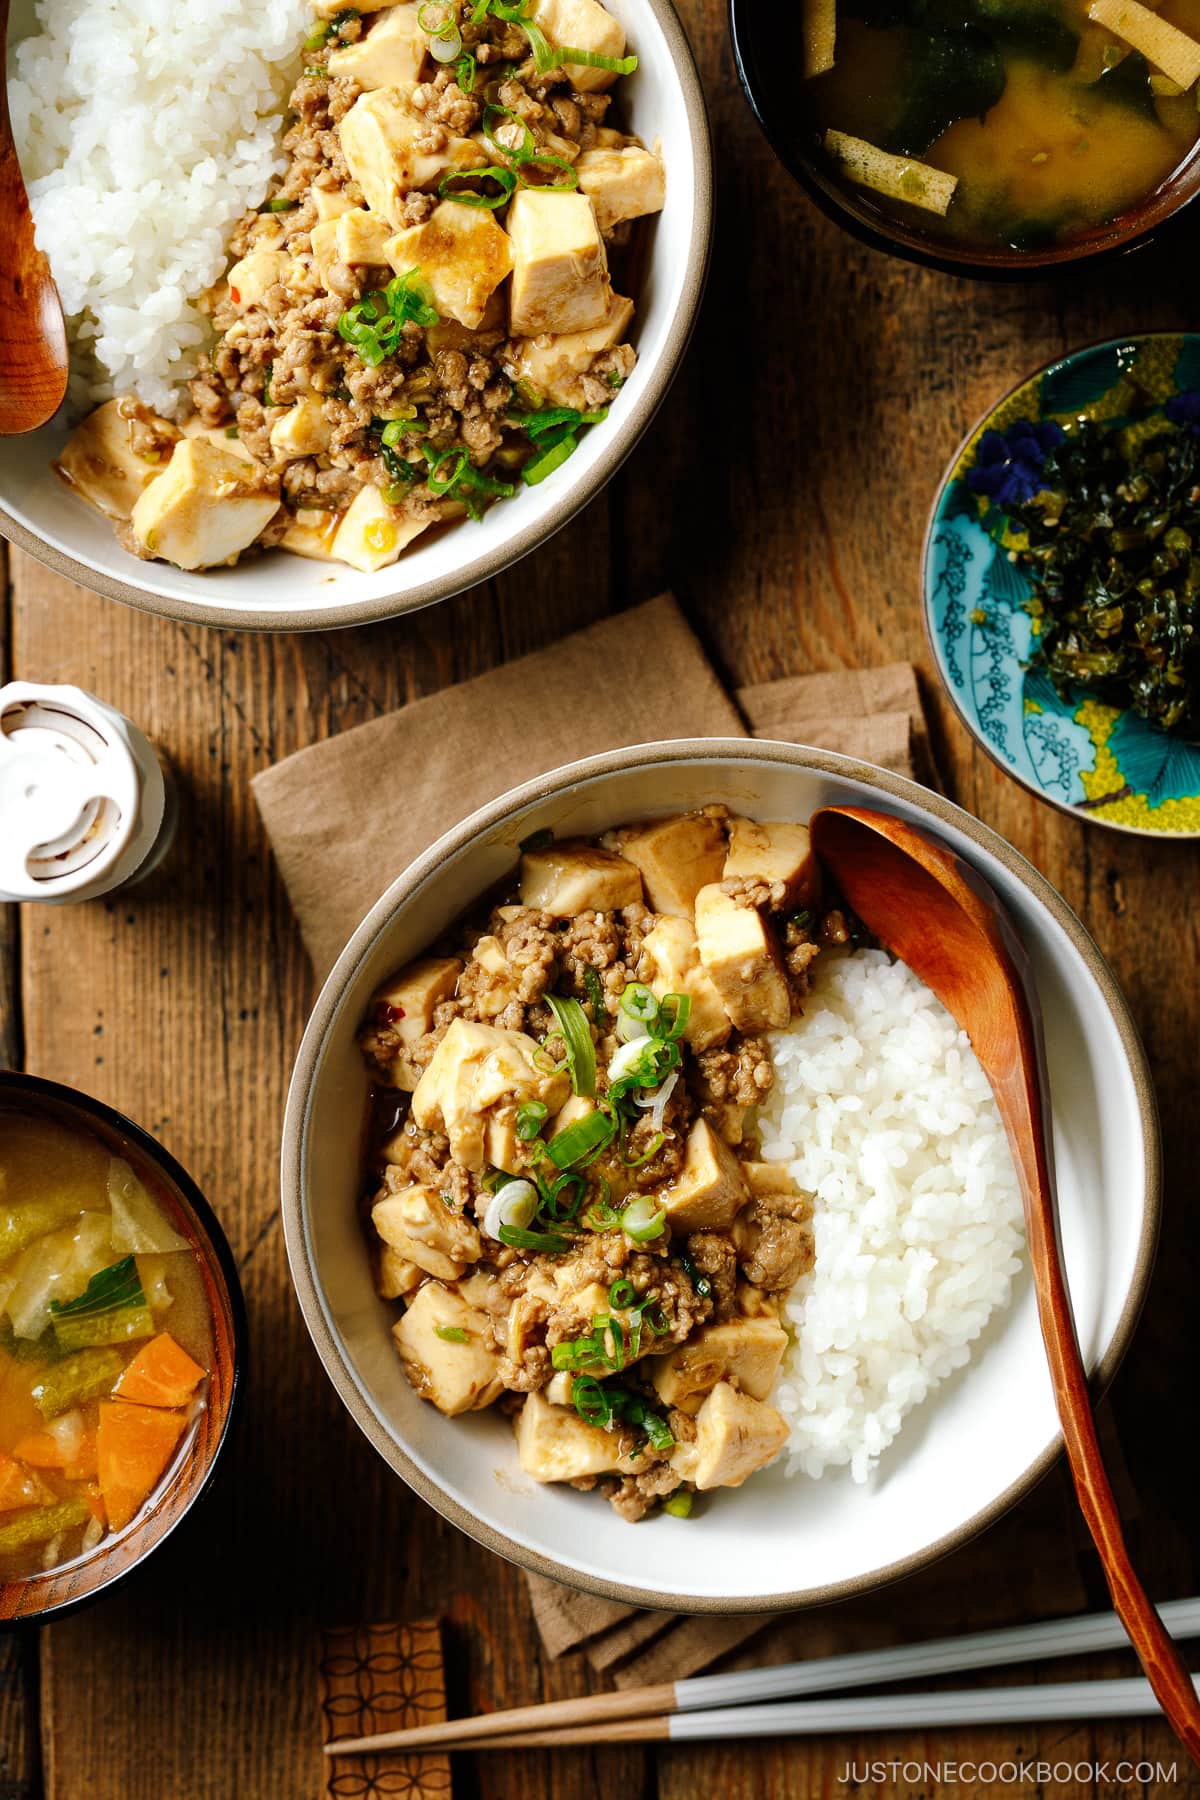 Bowls containing mapo tofu over steamed rice.